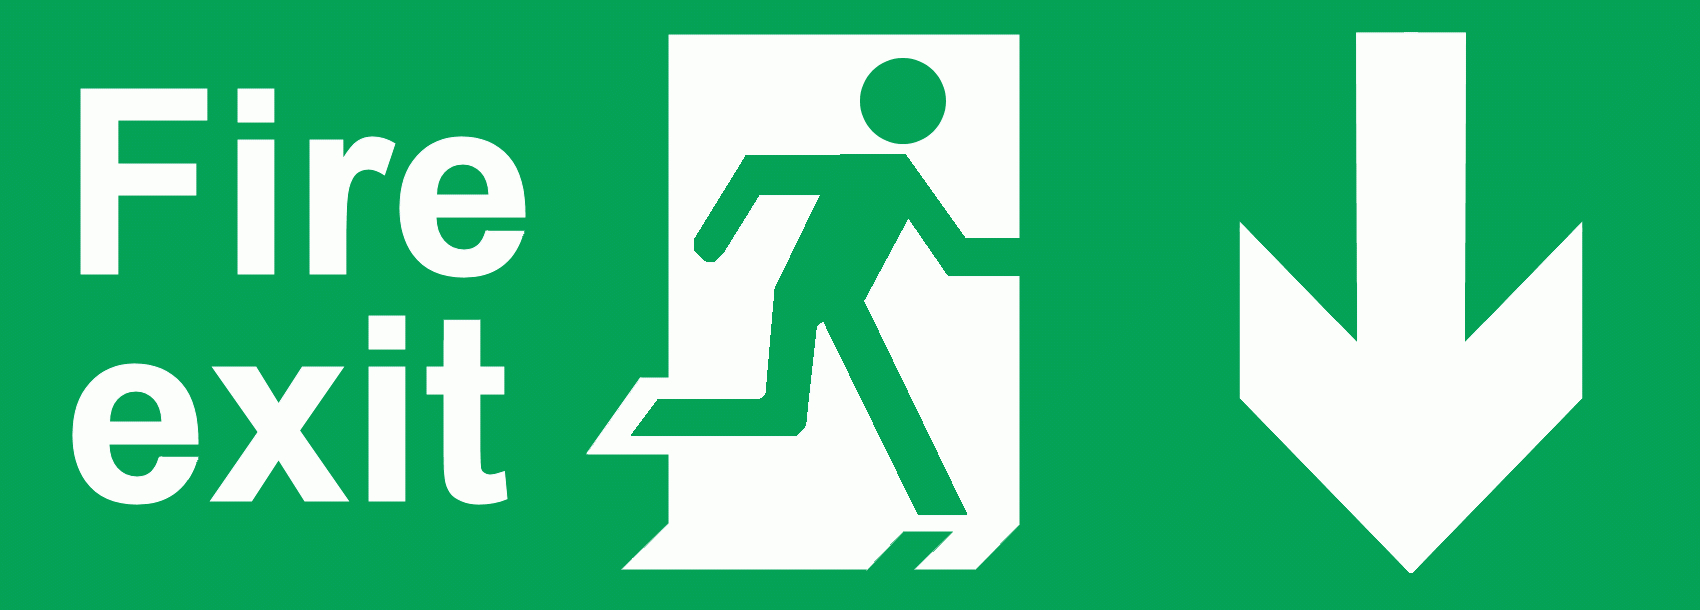 Free Fire Exit Signs, Download Free Clip Art, Free Clip Art On - Free Printable Health And Safety Signs